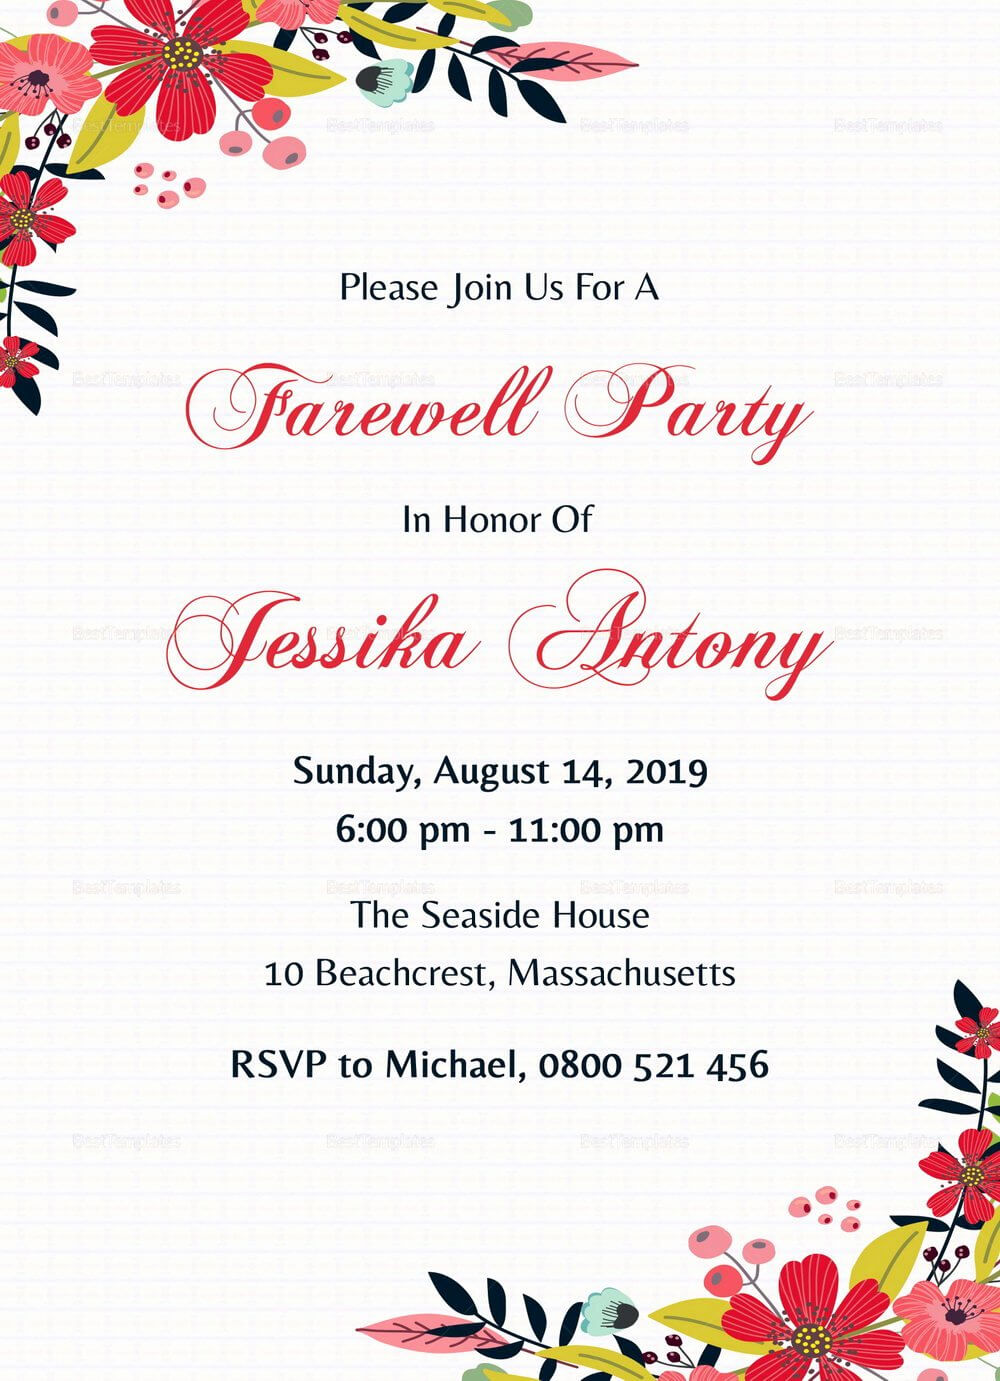 Stupendous Farewell Party Invitation Template Free Ideas Pertaining To Farewell Card Template Word